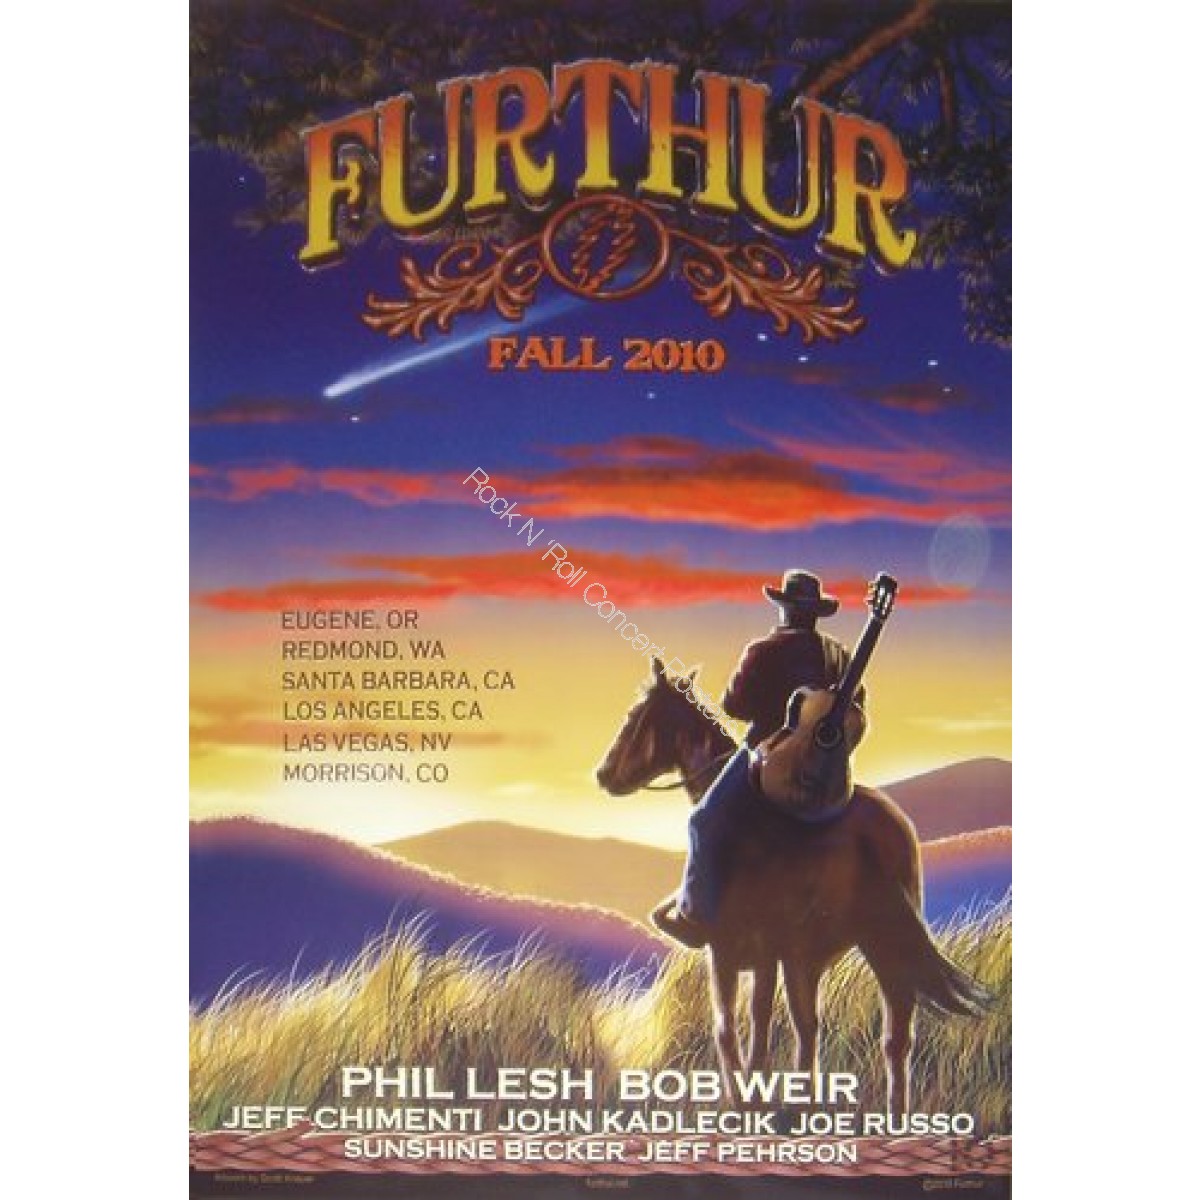 Furthur Grateful Dead Fall Tour 2010 Official Limited Edition Poster